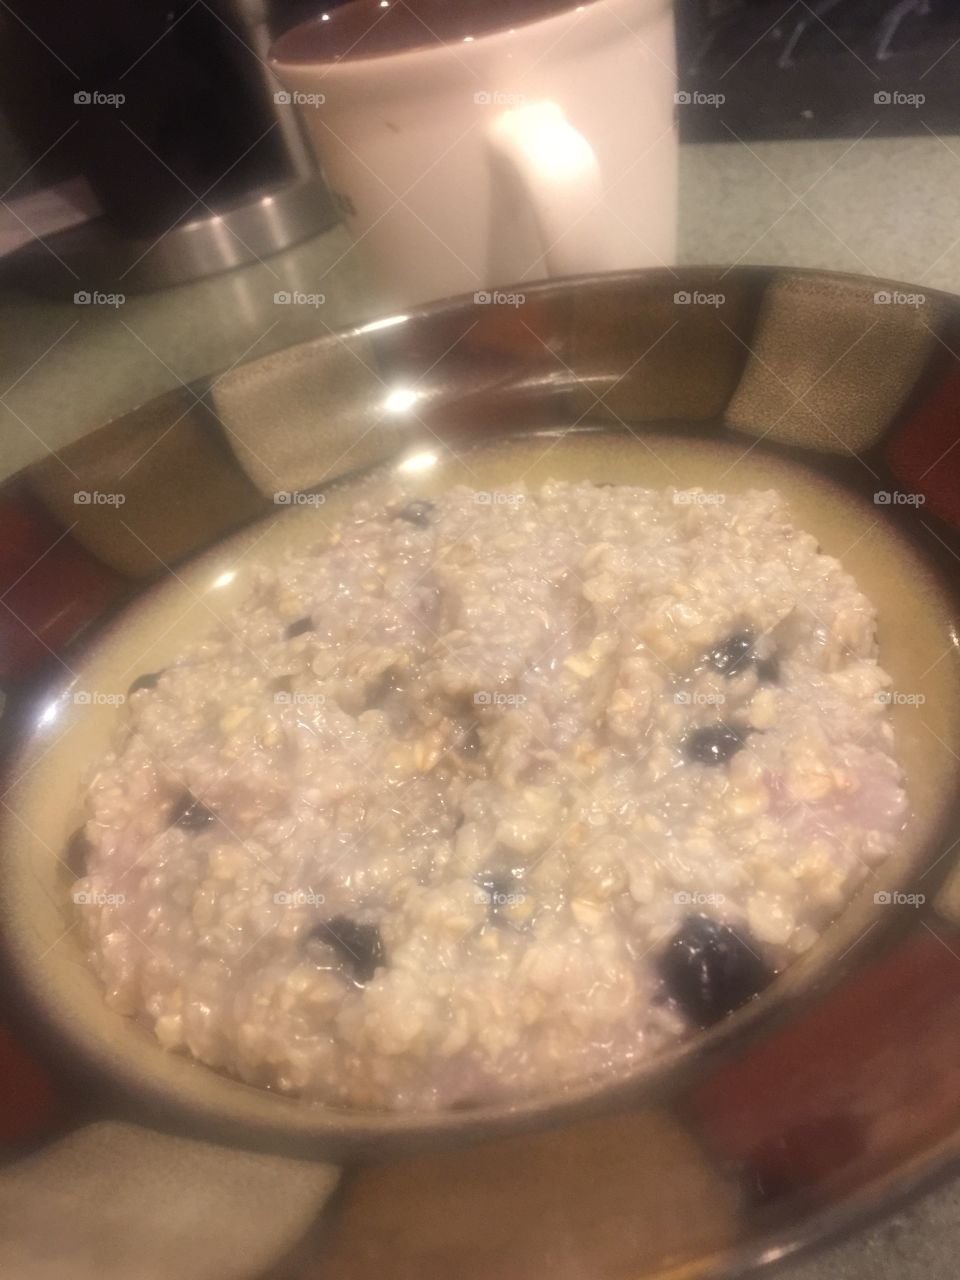 Morning rituals oatmeal with blueberries